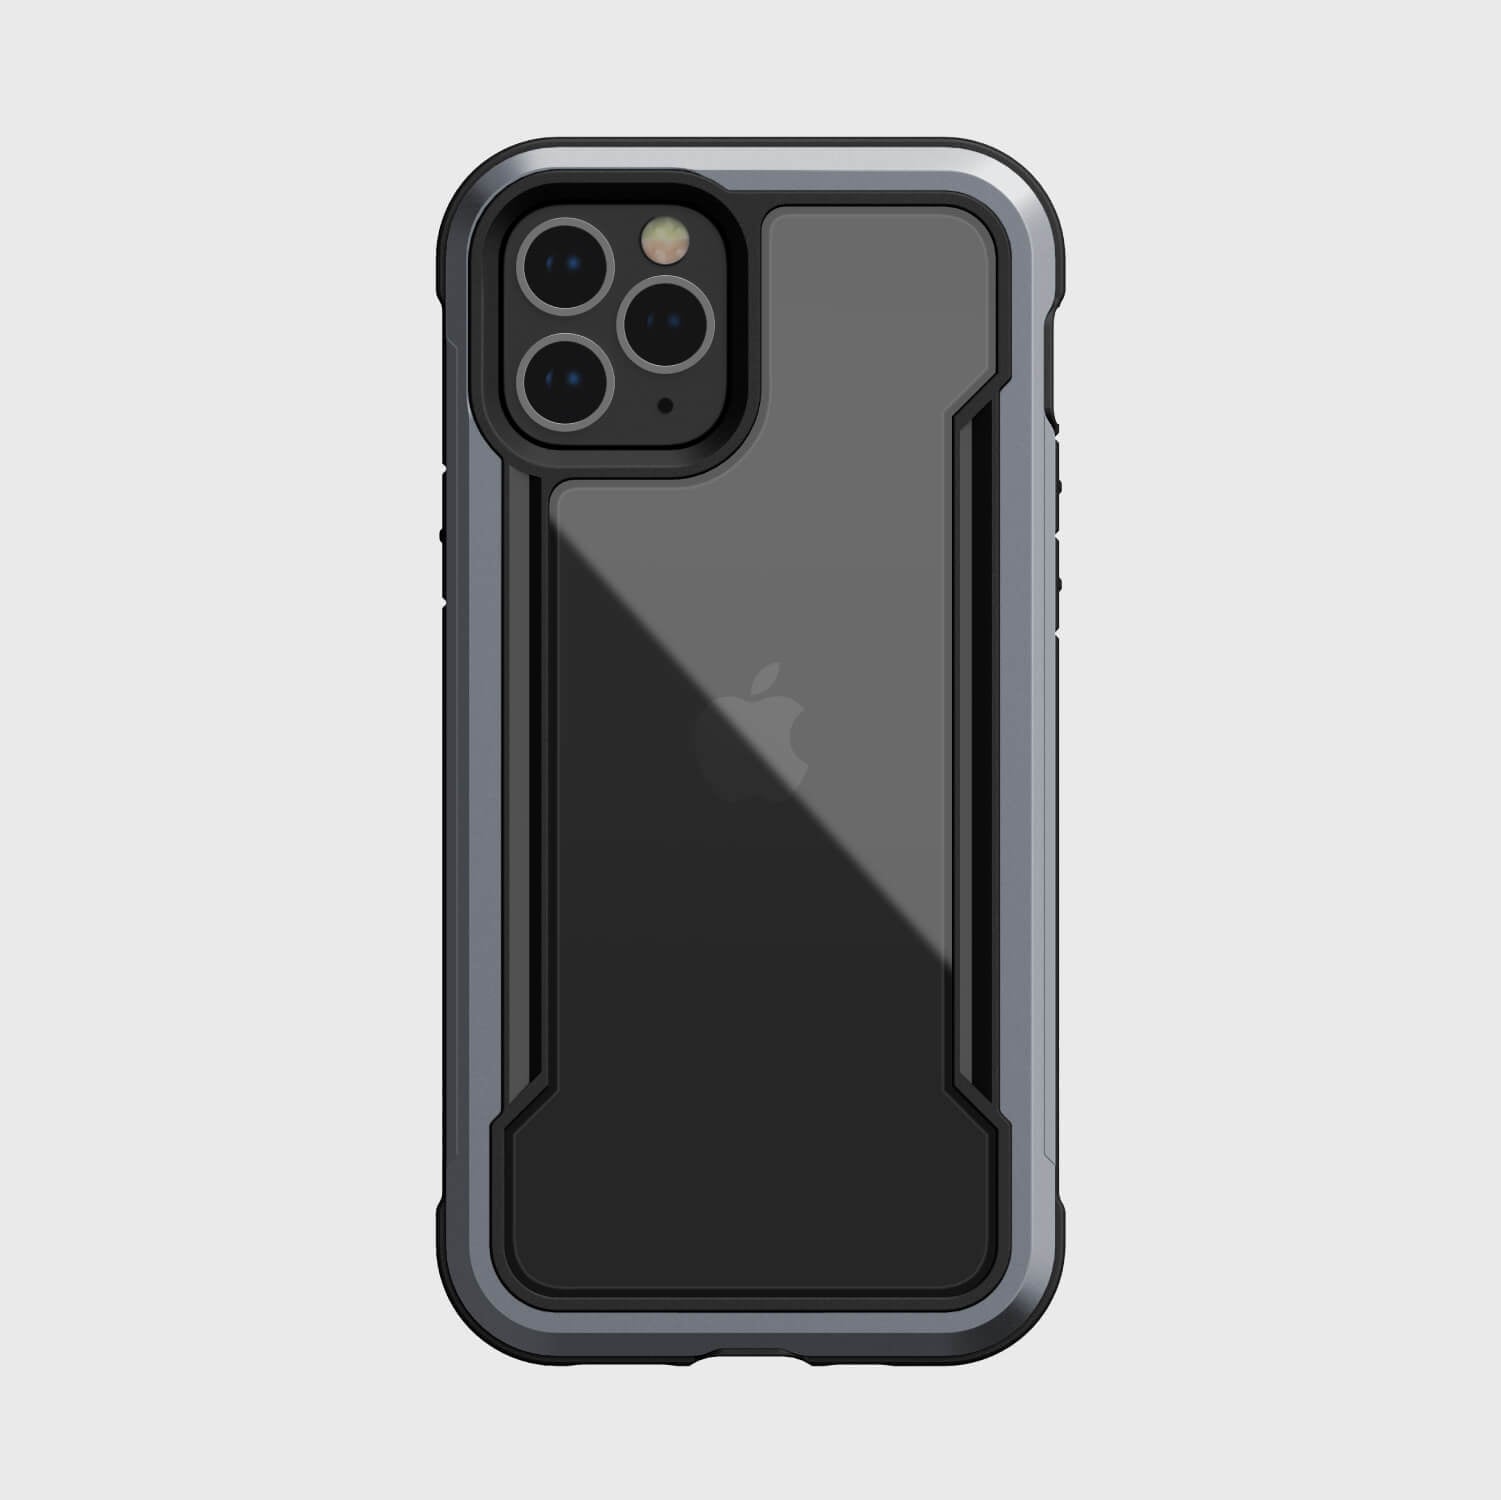 The back of an iPhone 12 Pro Max Case - SHIELD by Raptic offering foot drop protection.